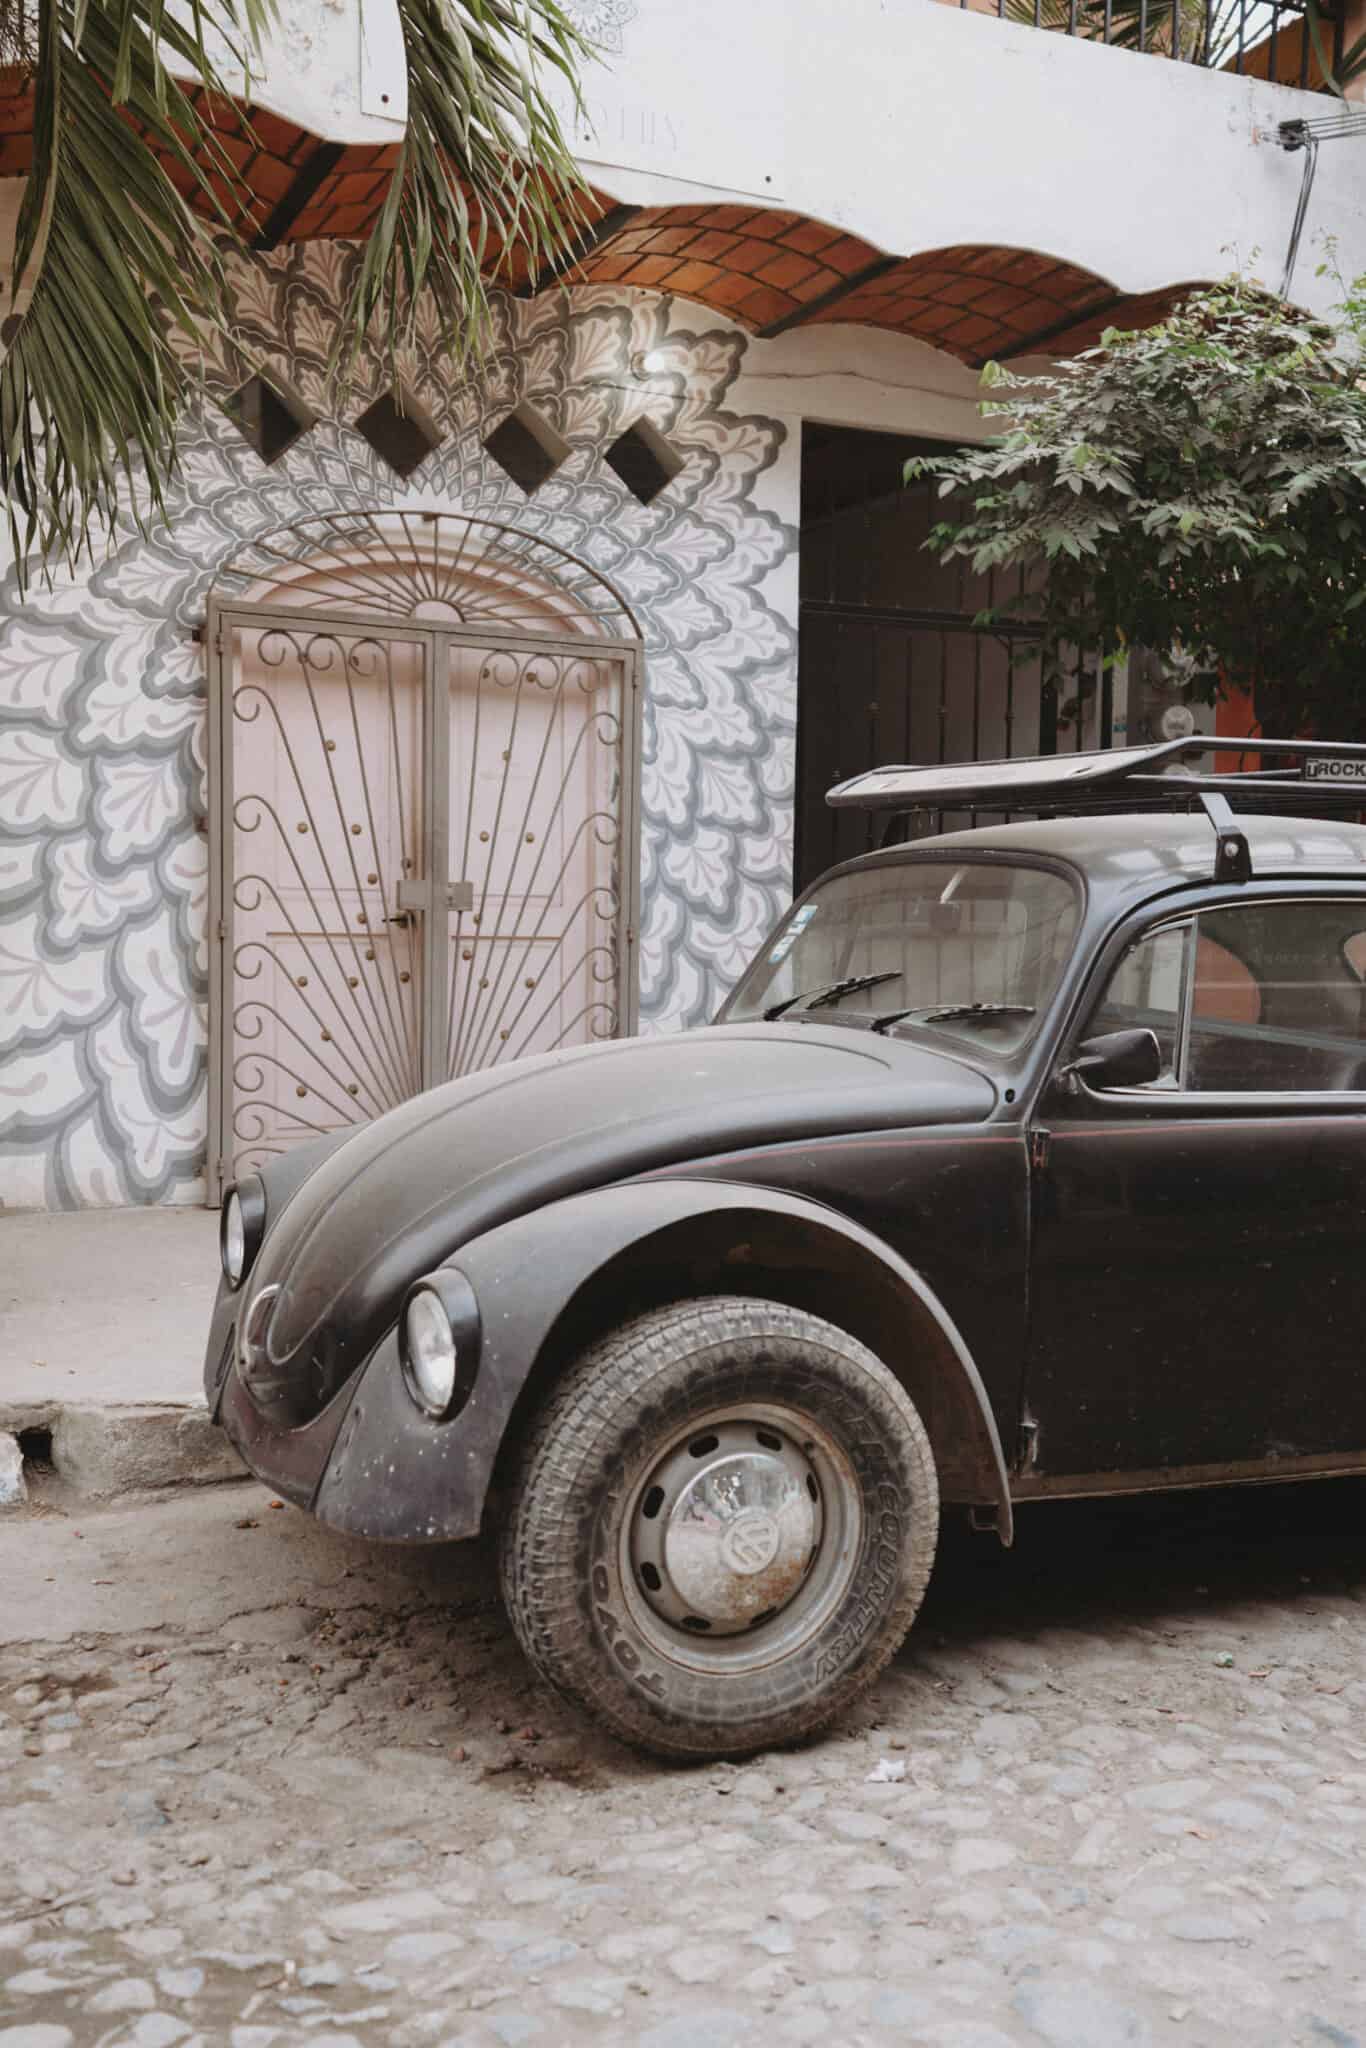 A black Volkswagen Beetle parked in front of a house in Sayulita.